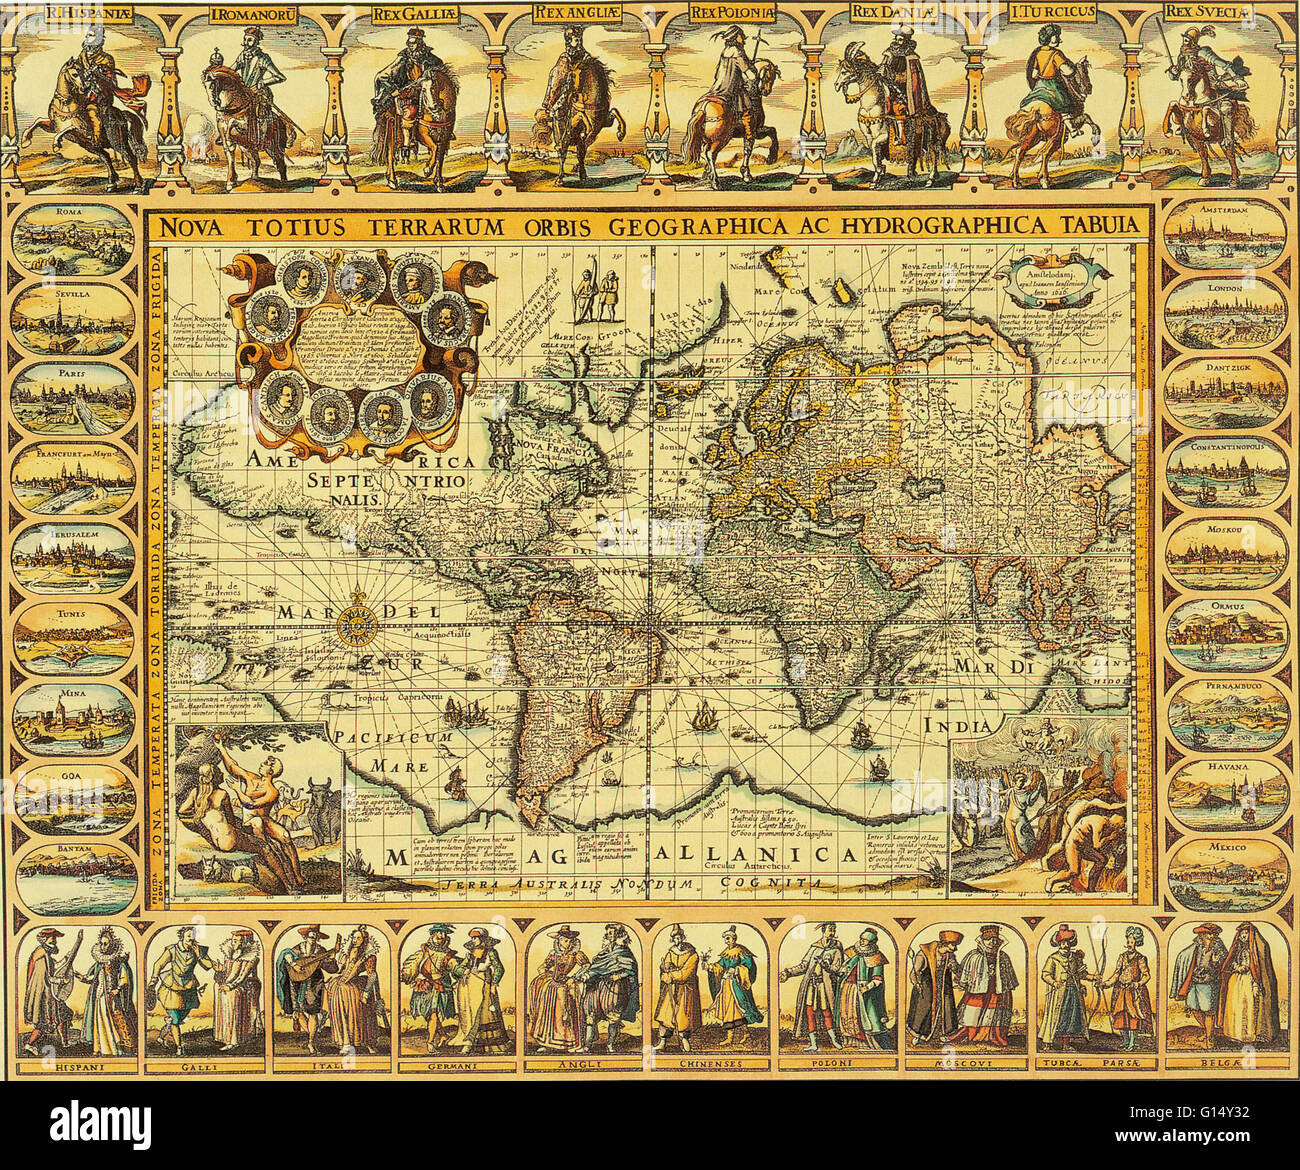 Chart of the world from 1626. 'Nova Totius Terrarum Orbis Geographica ac Hydrographica Tabula.' Engraving by Johannes Janssonius. Stock Photo